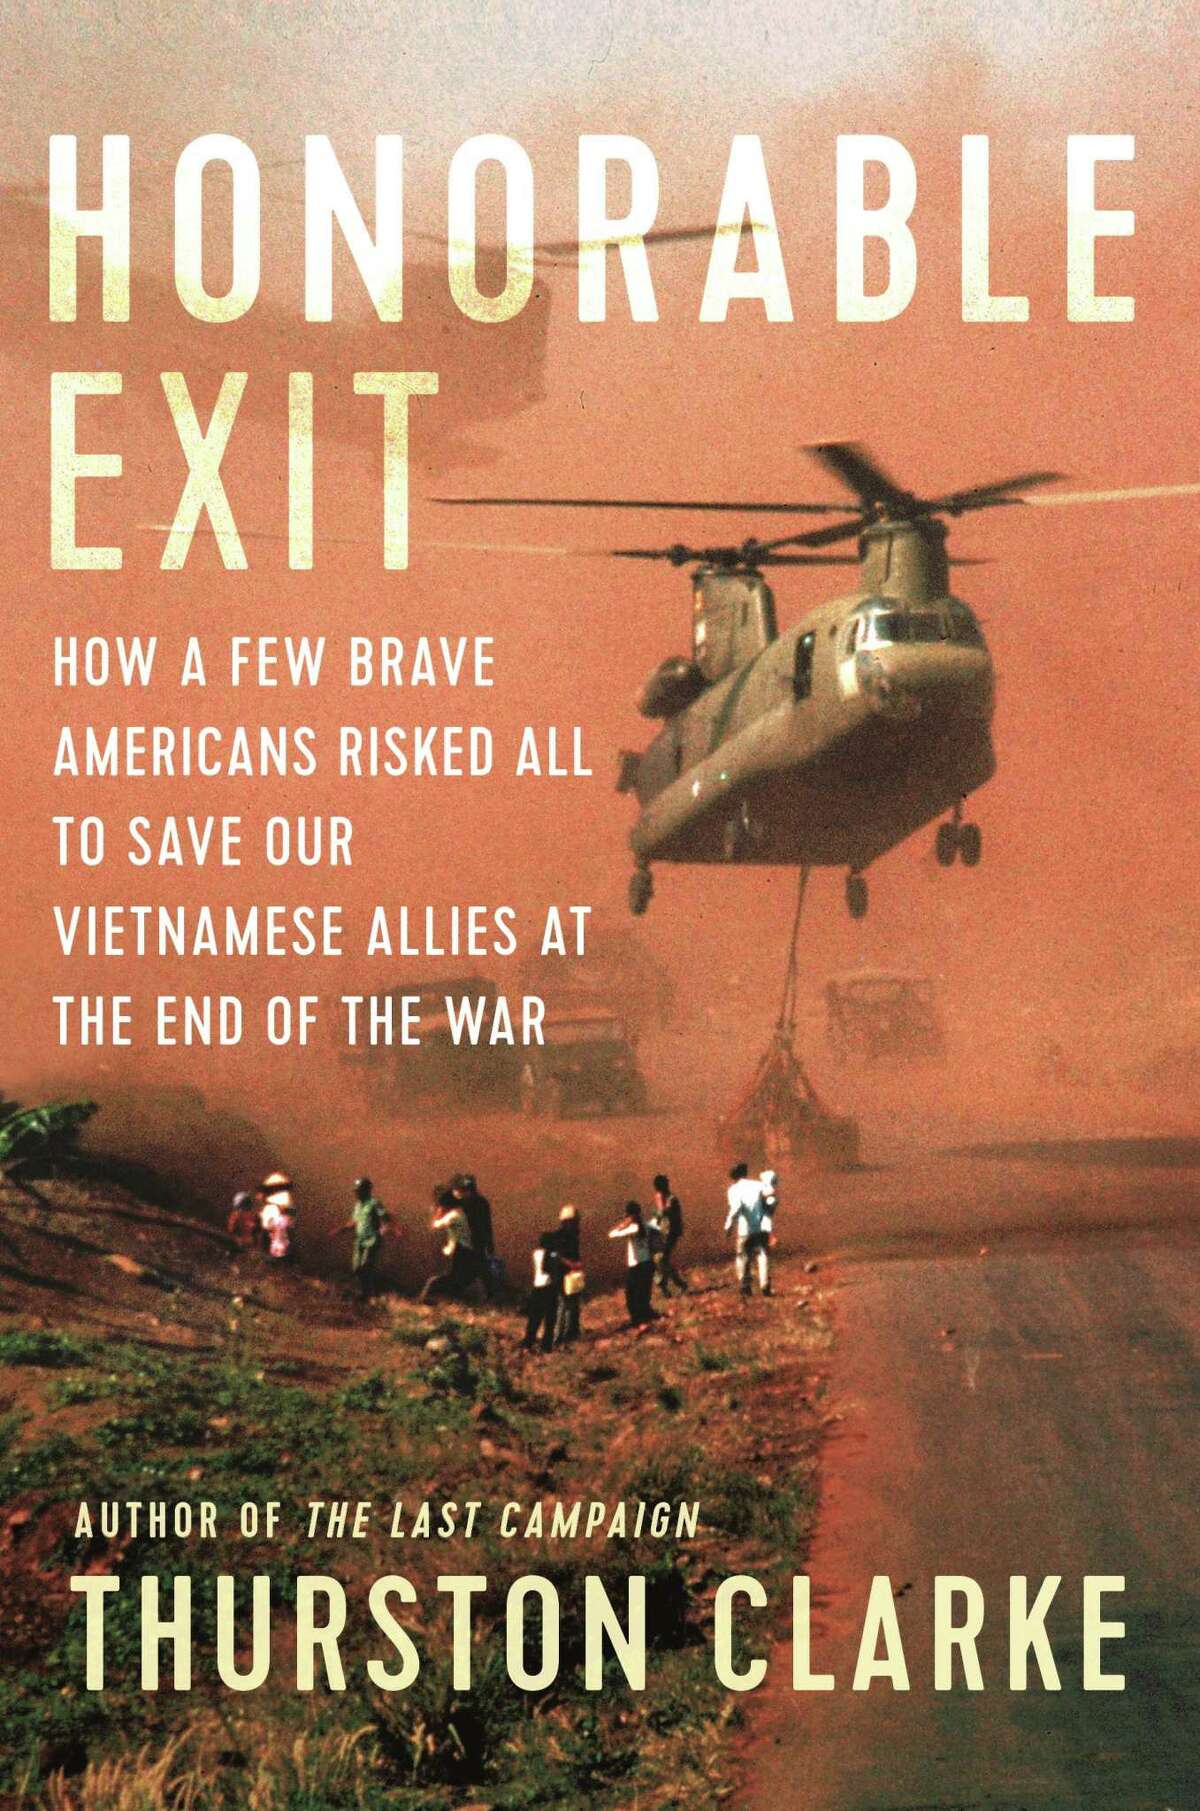 "Honorable Exit: How a Few Brave Americans Risked All to Save Our Vietnamese Allies at the End of the War" by Thurston Clarke (Penguin Random House)